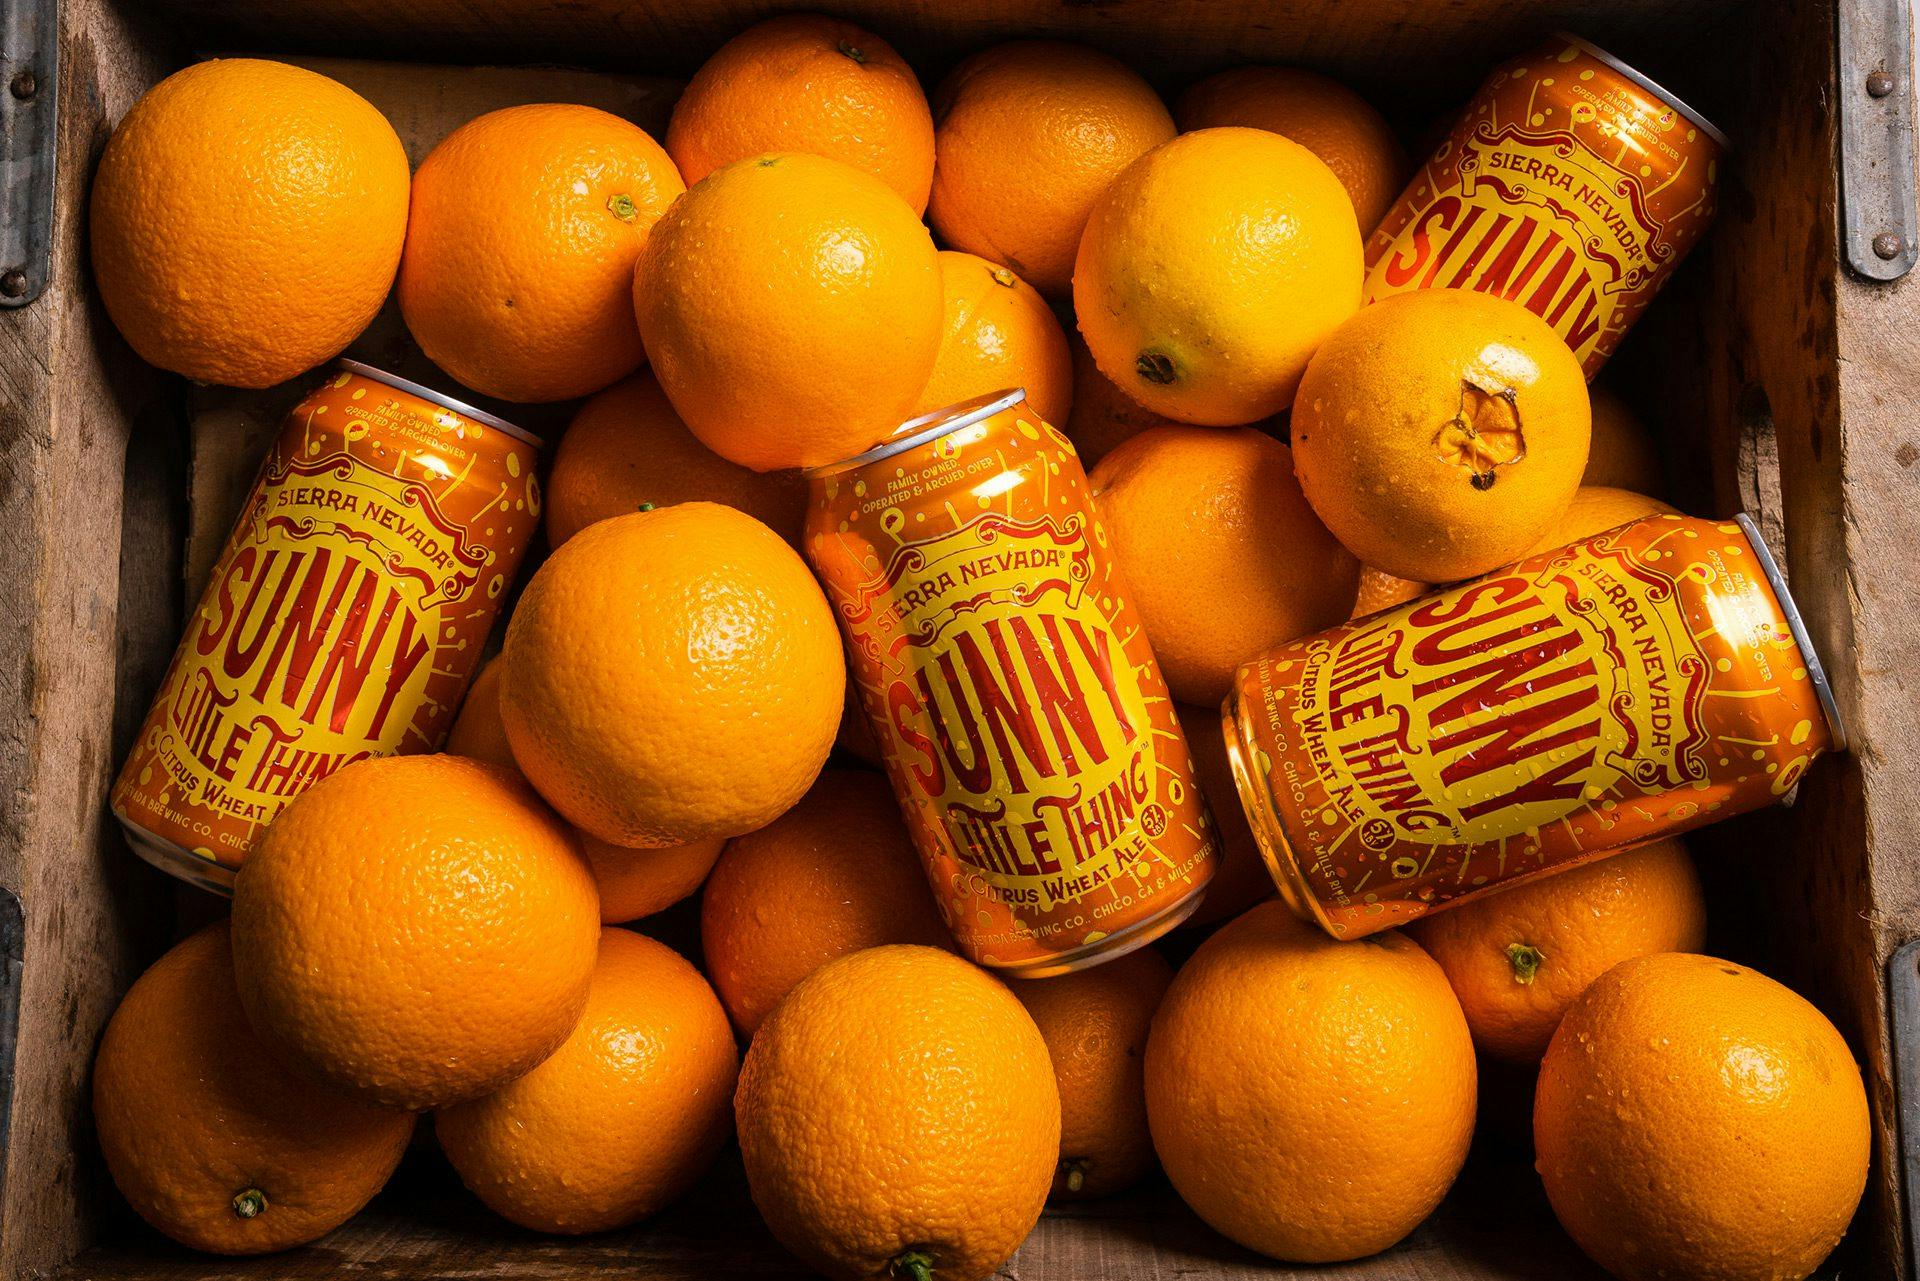 Sunny Little Things citrus wheat ale cans on oranges